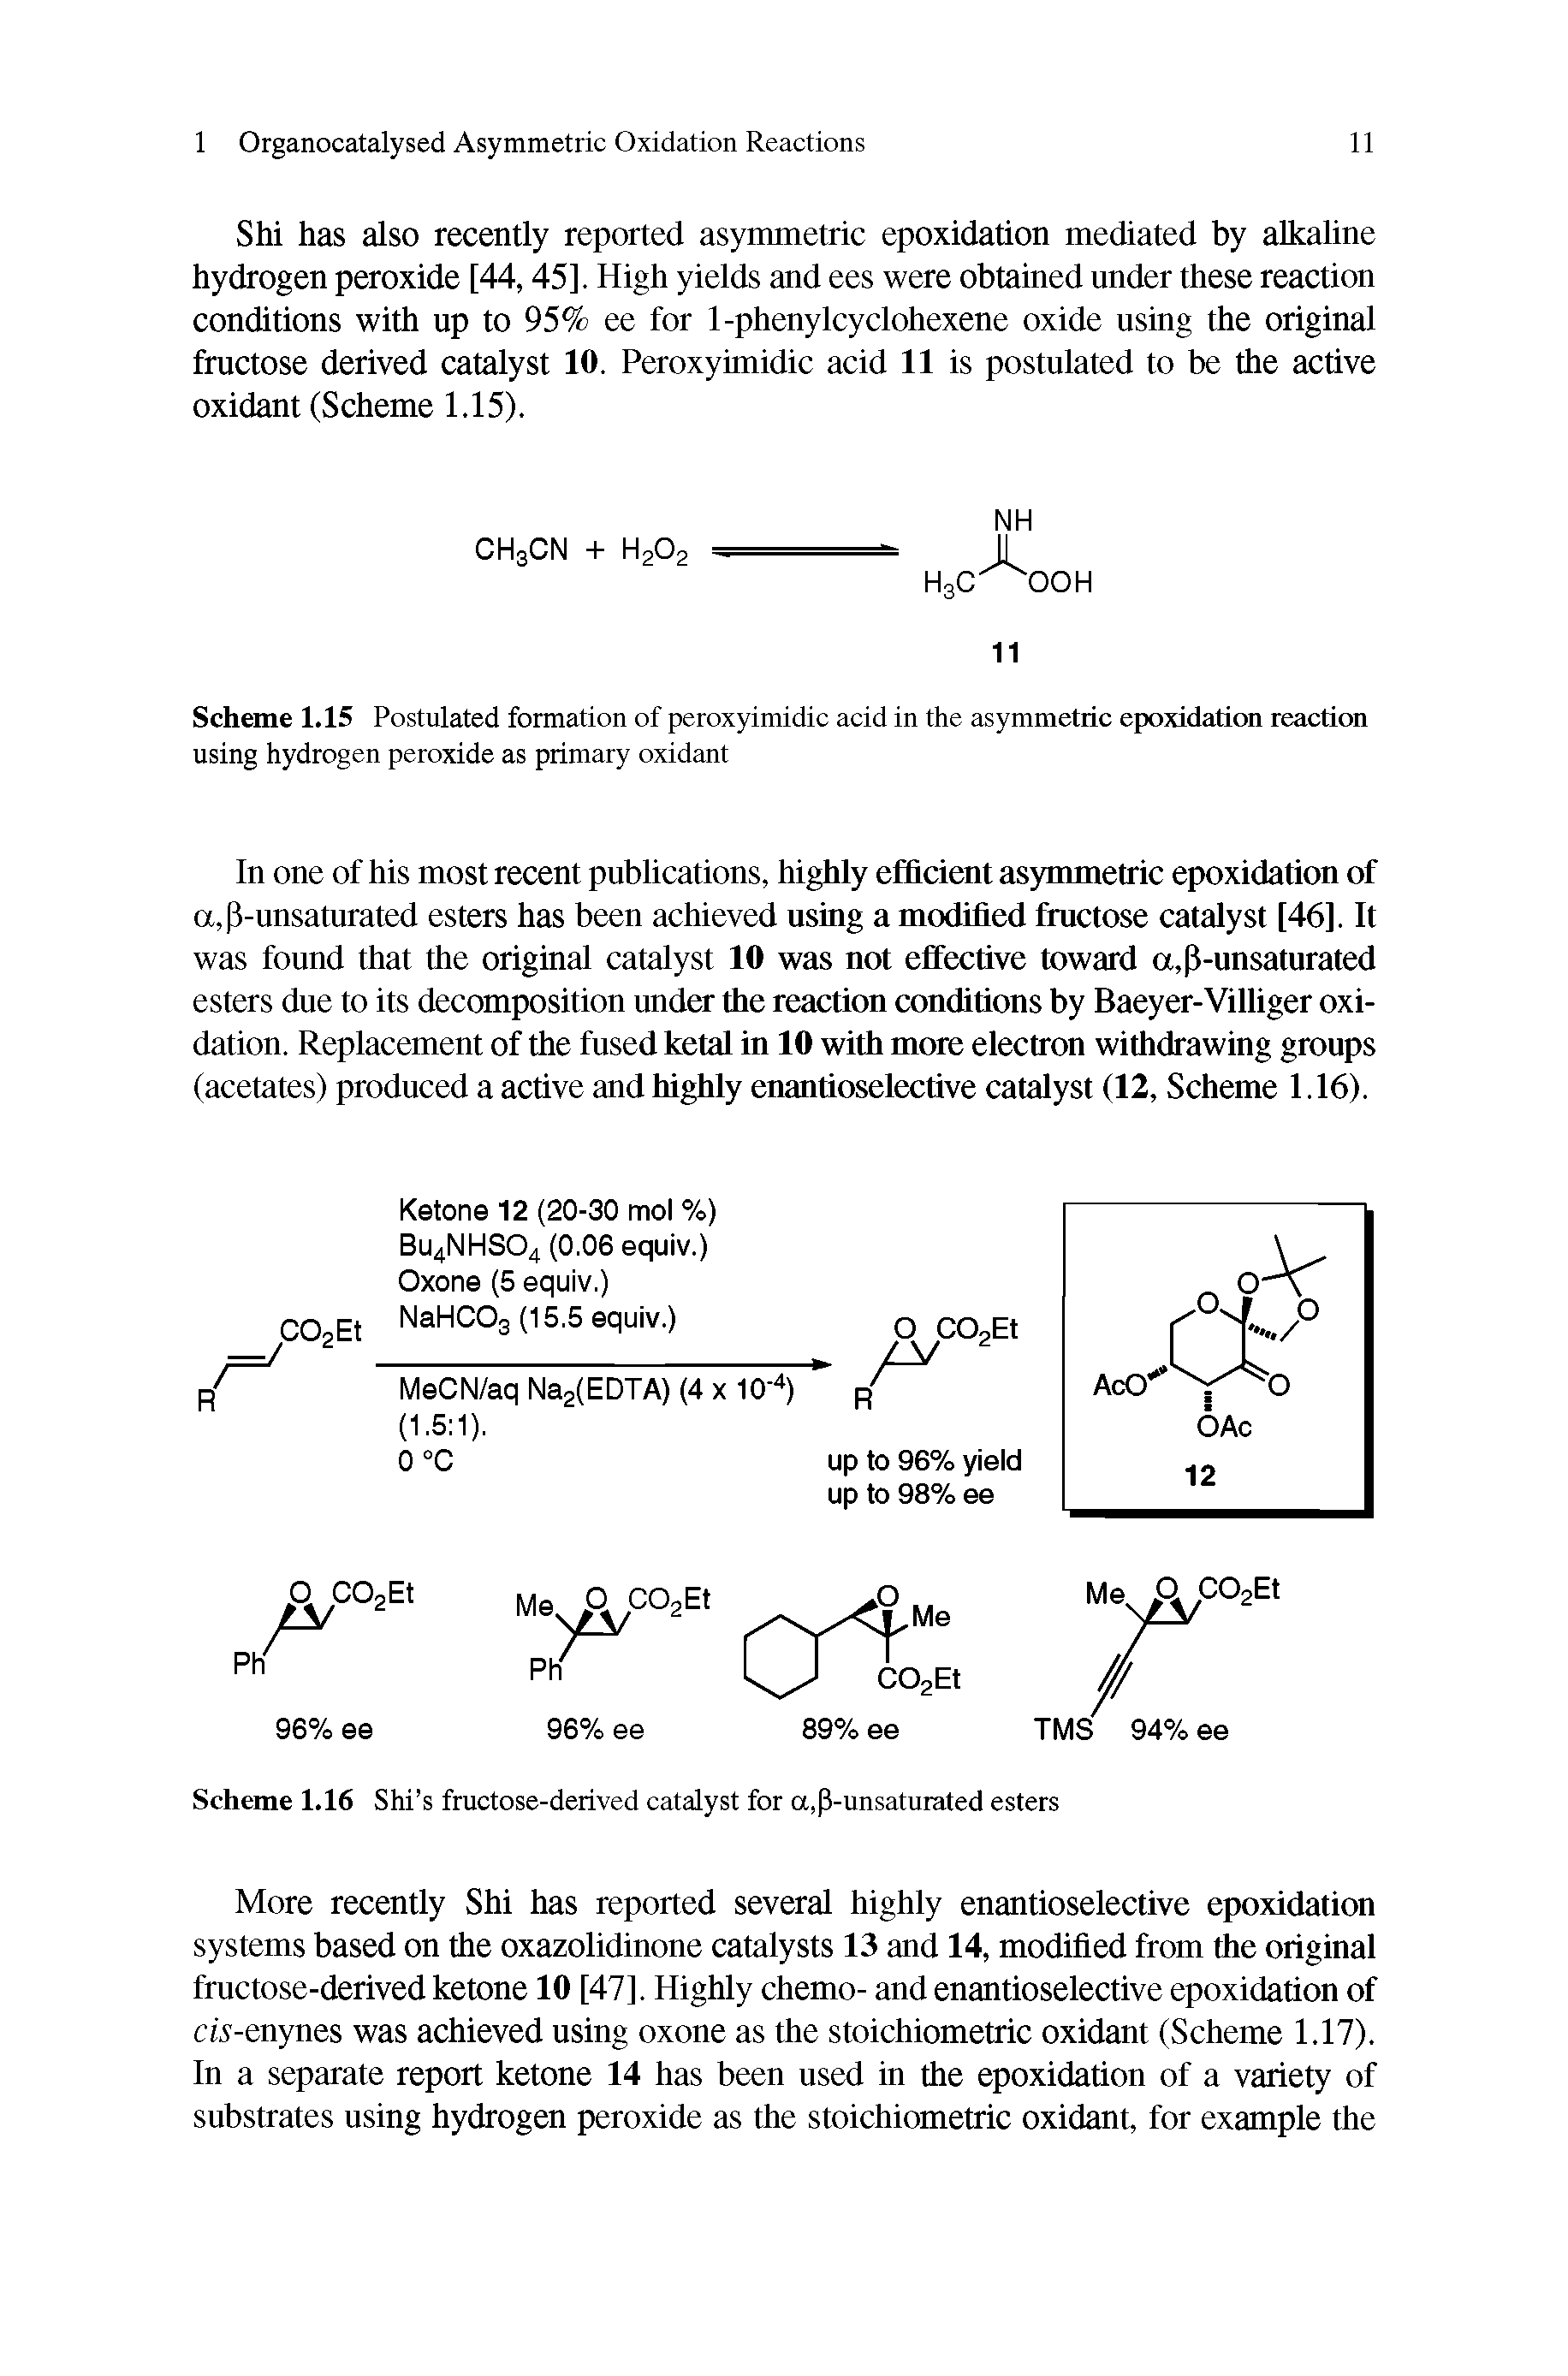 Scheme 1.15 Postulated formation of peroxyimidic acid in the asymmetric epoxidation reaction using hydrogen peroxide as primary oxidant...